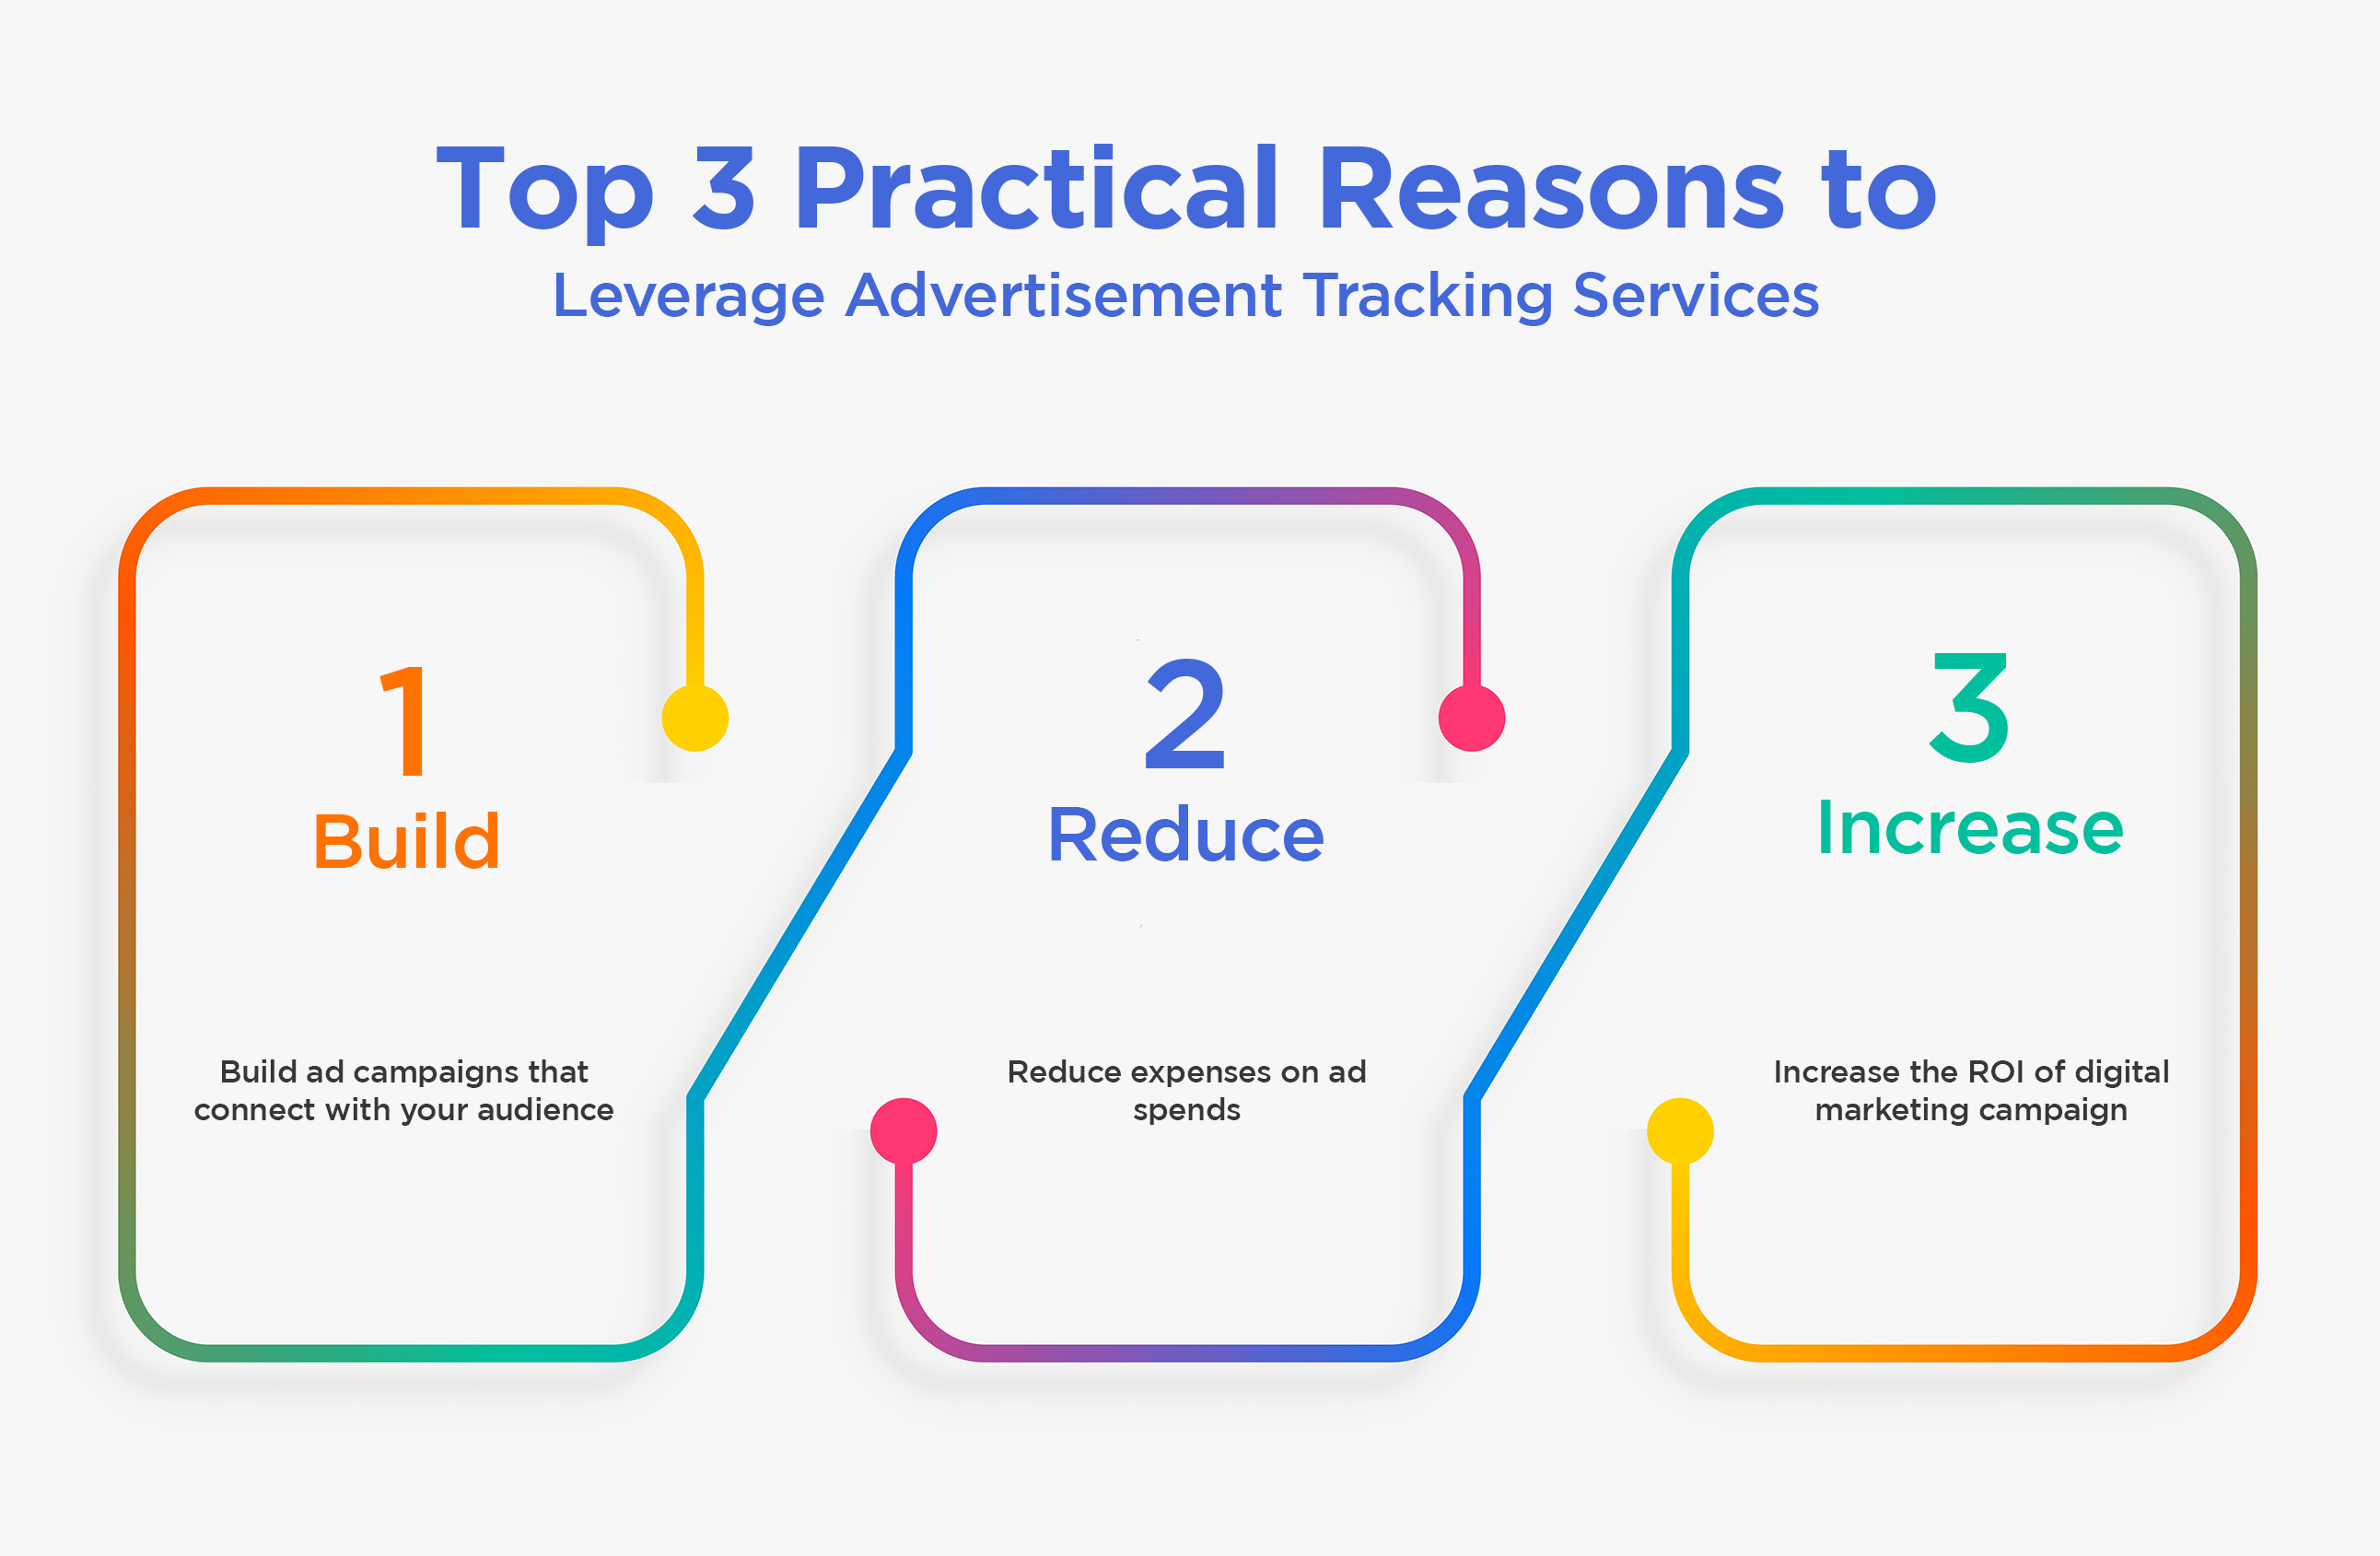 Top 3 Practical Reasons to Leverage Advertisement Tracking Services